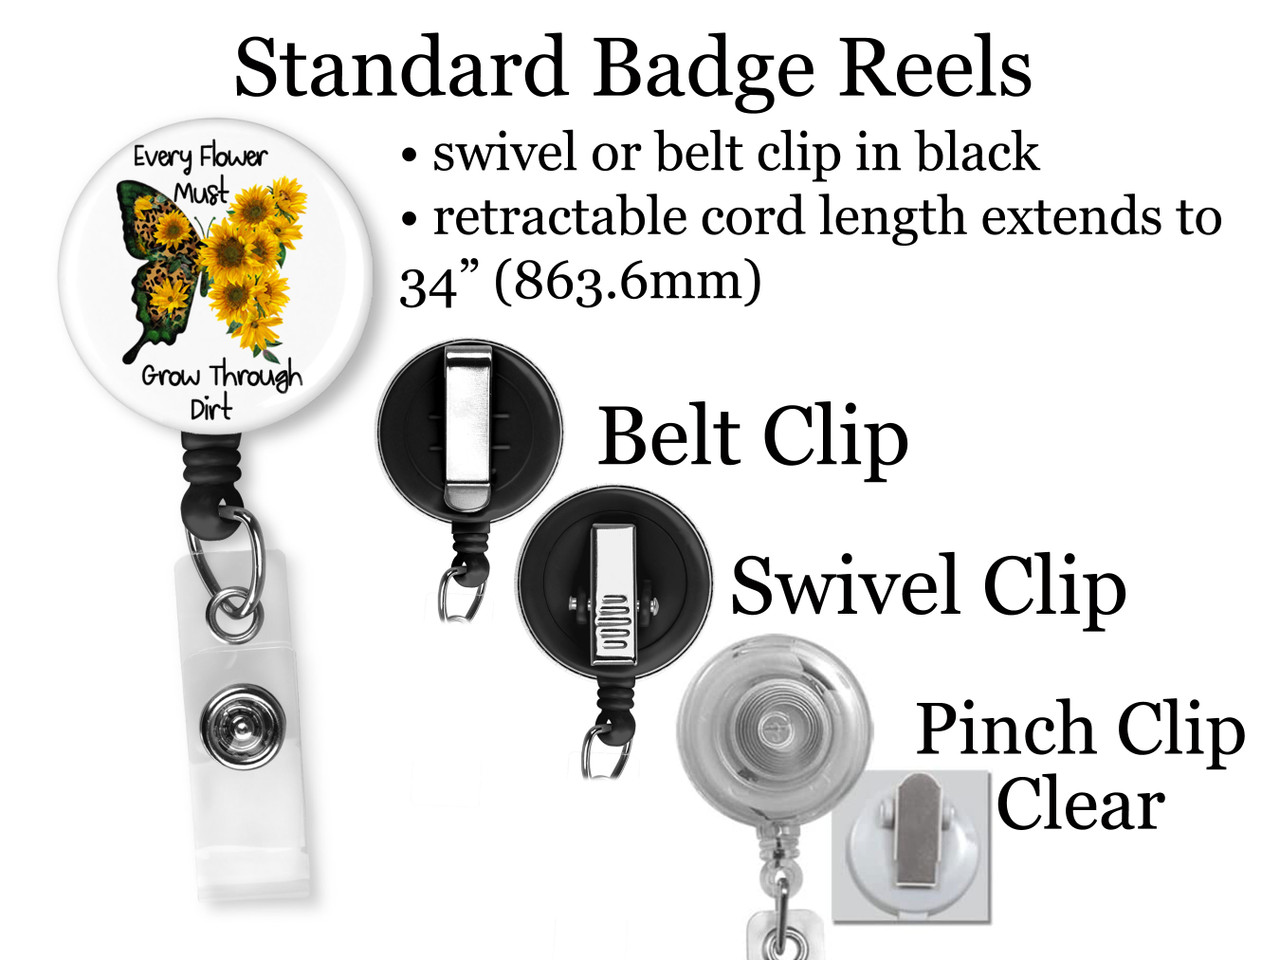 Butterfly Retractable ID Badge Reel, Lanyard, or Carabiner - The